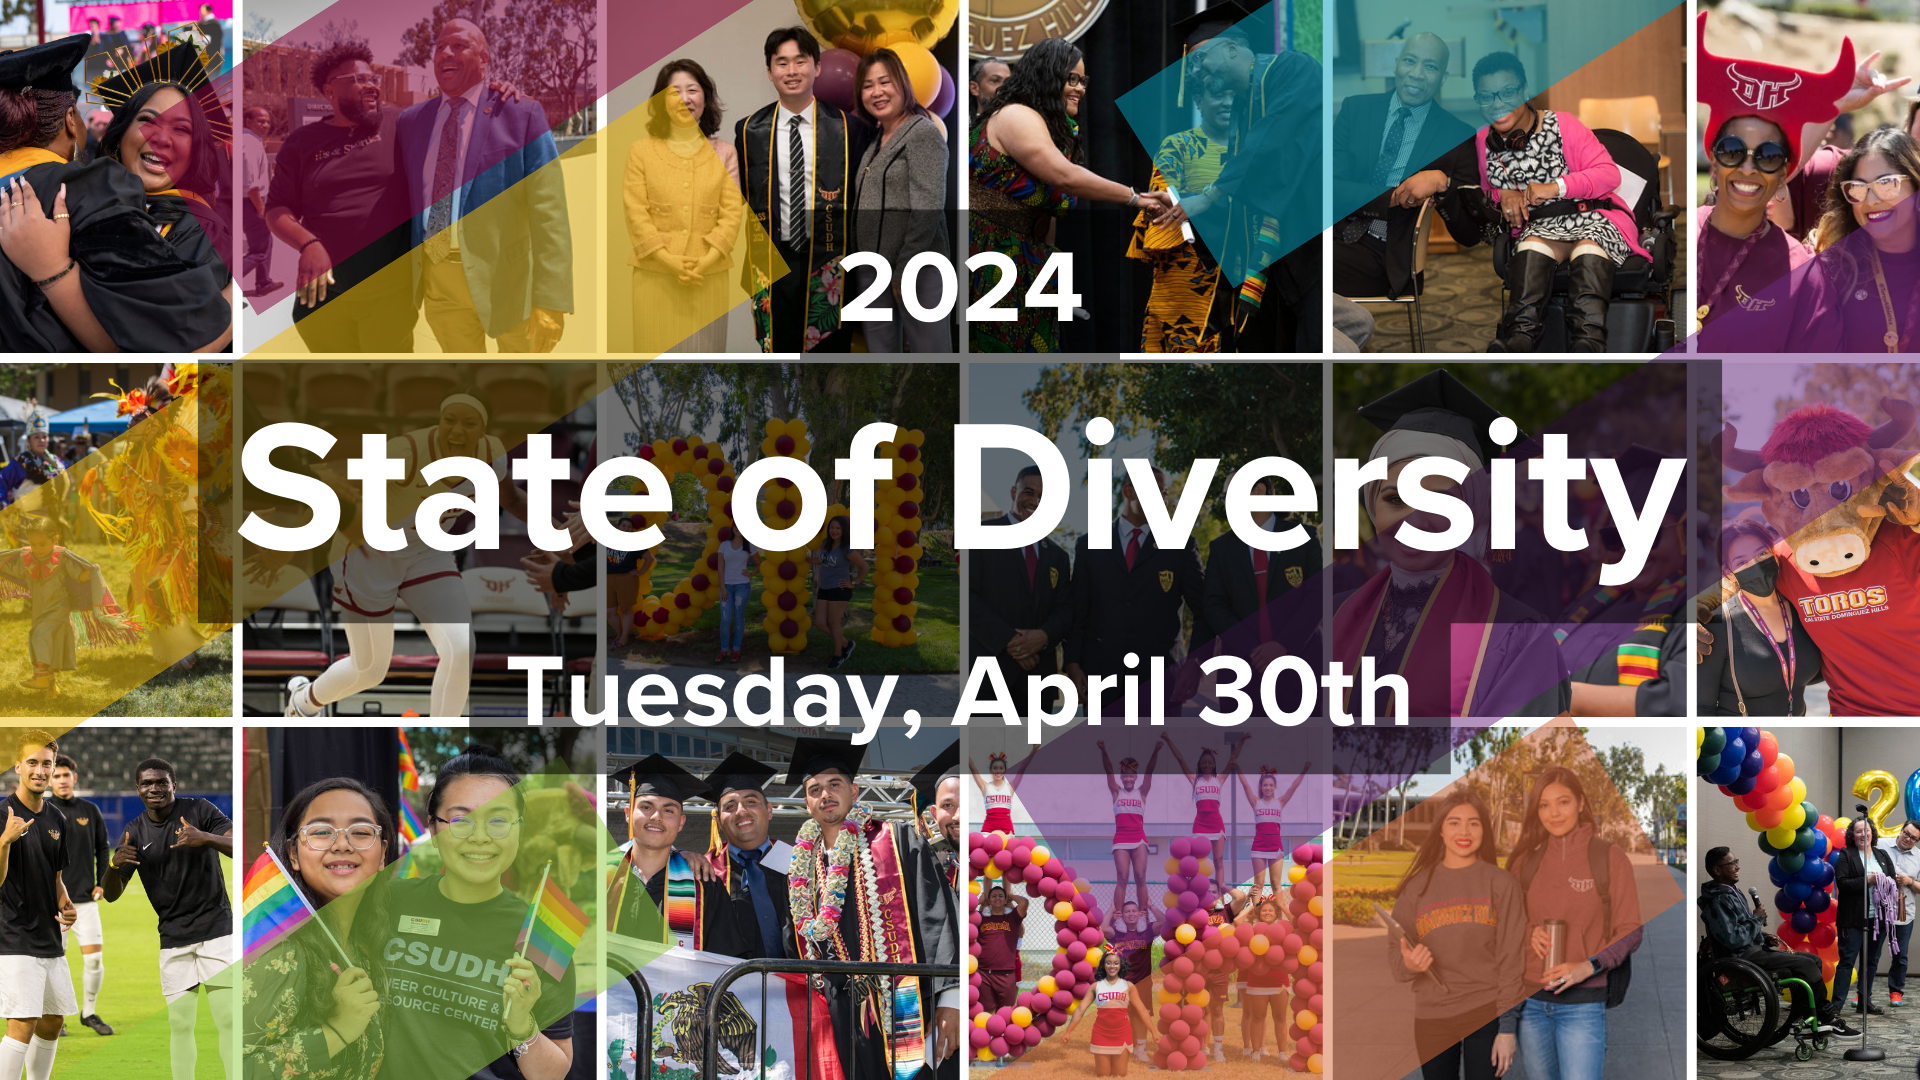 State of Diversity Save the Date - Tuesday, April 30, 2024